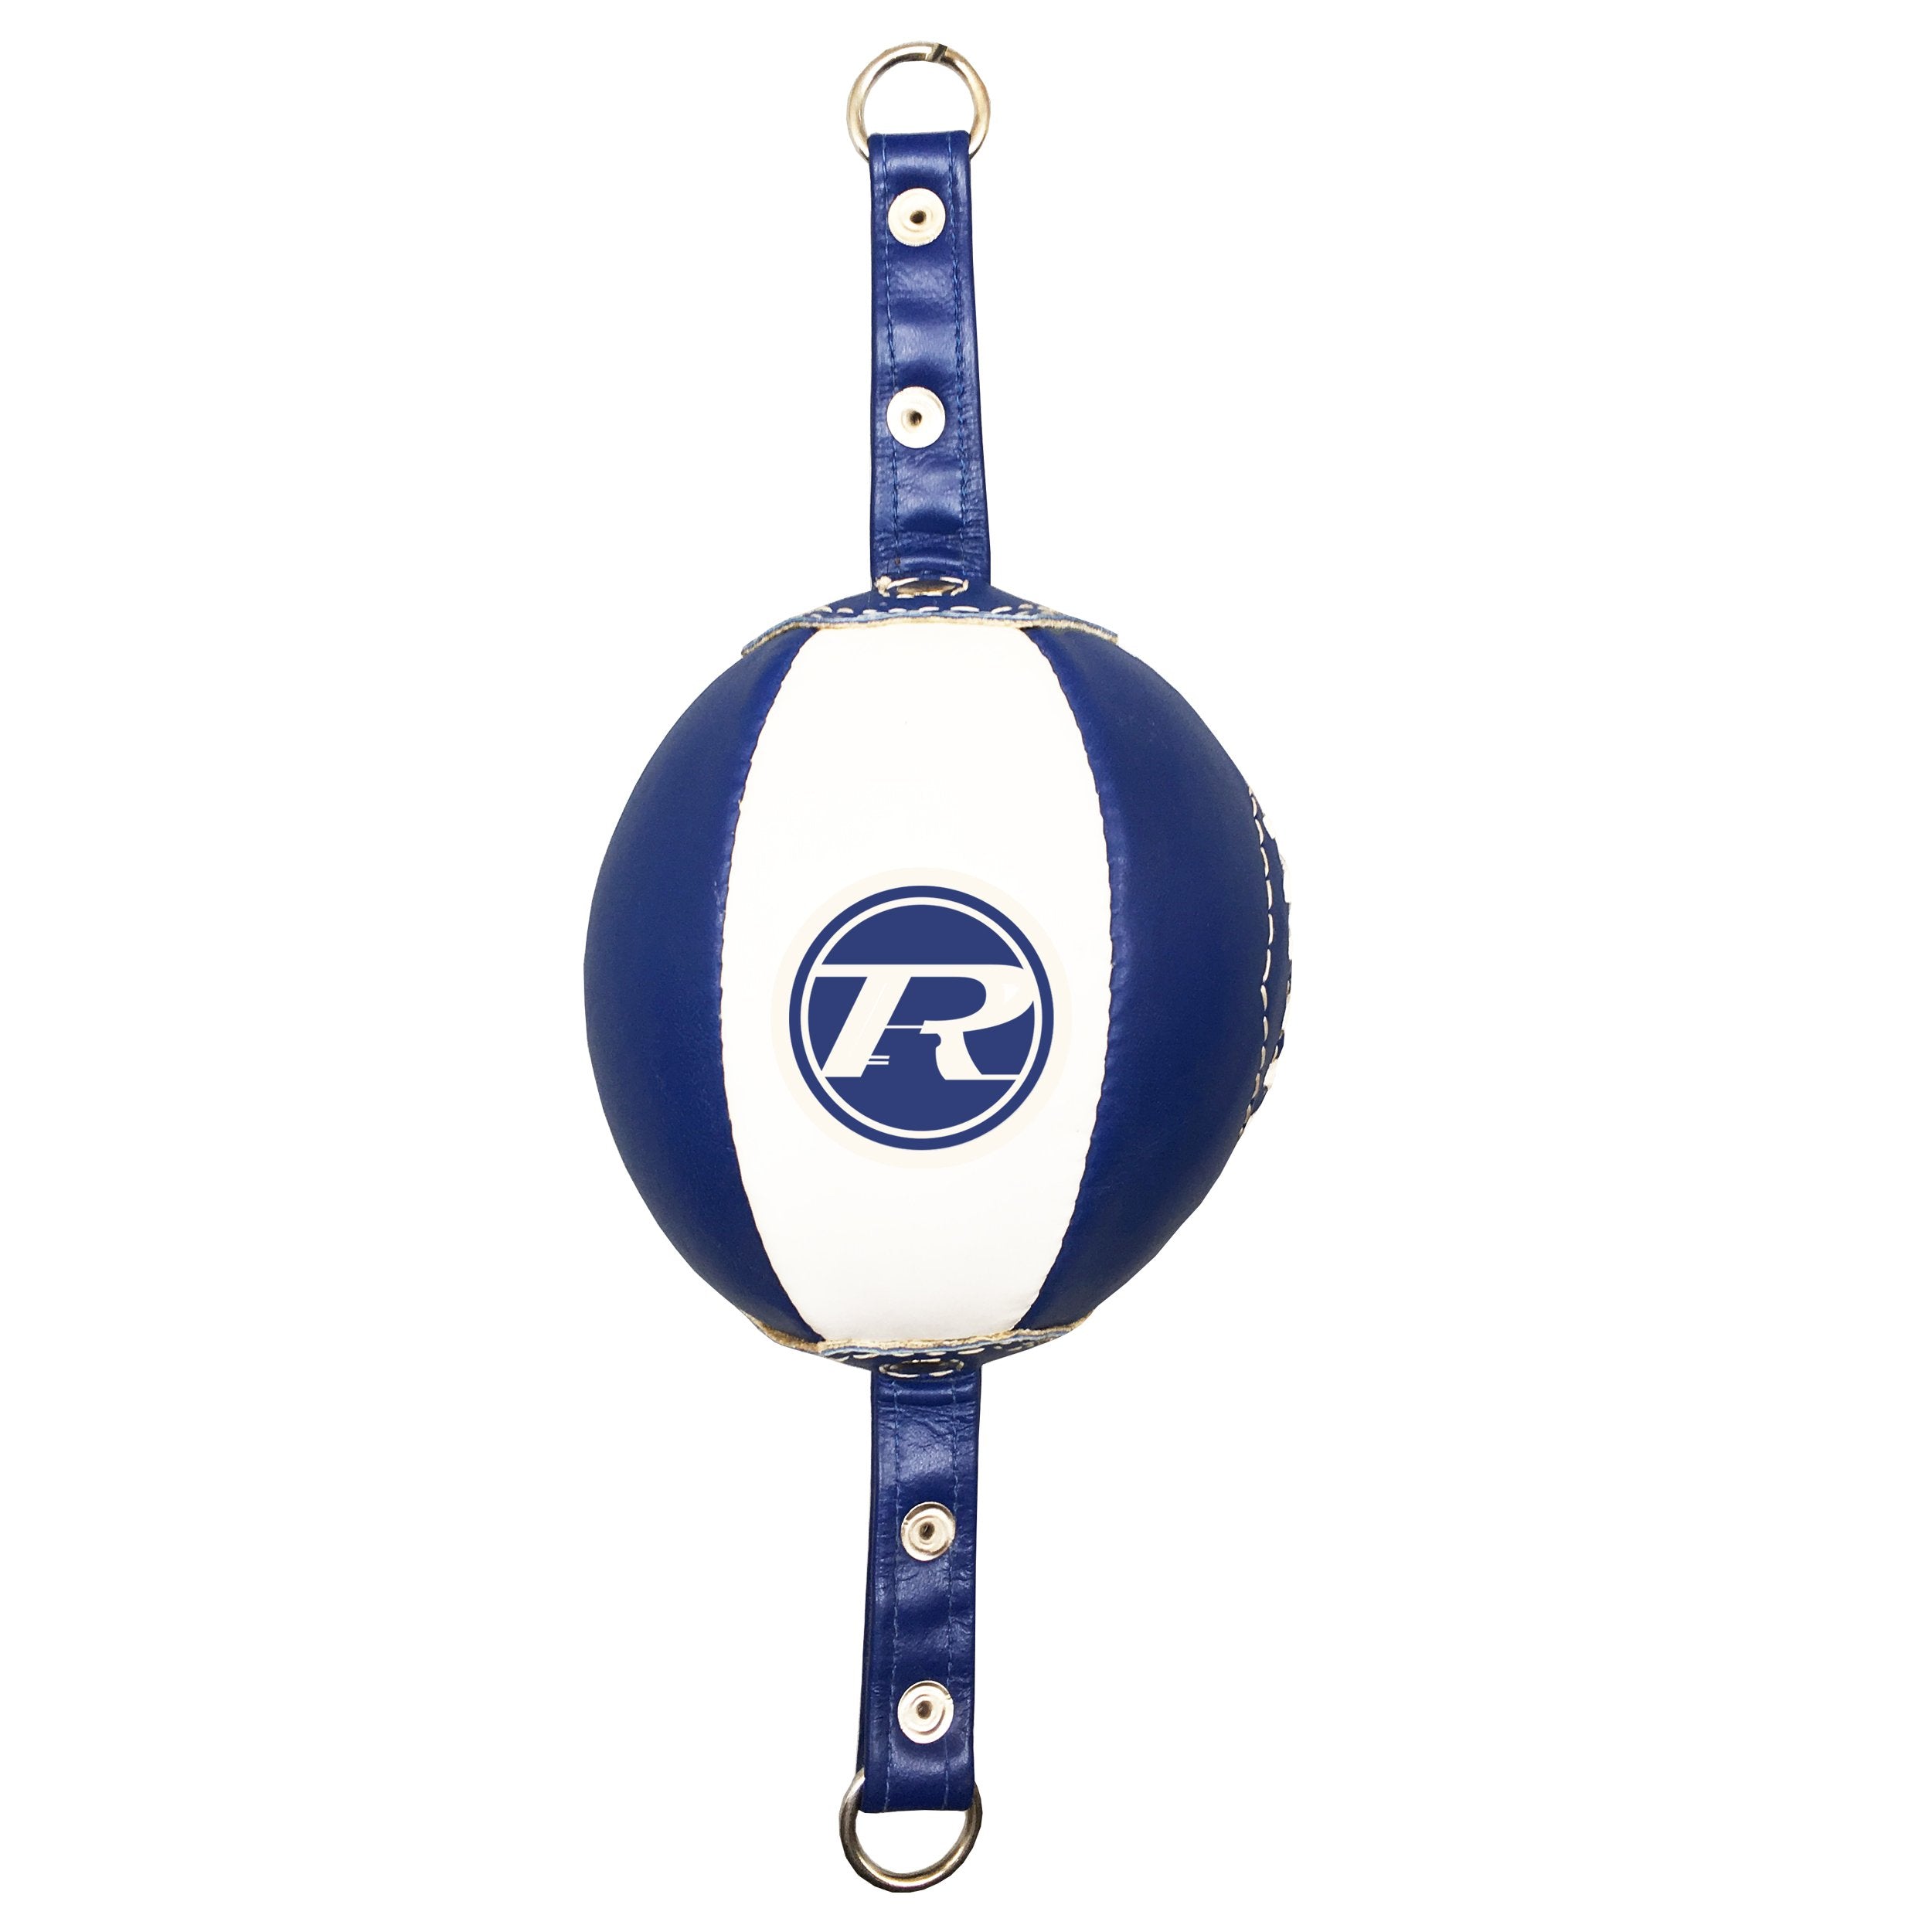 Leather Reaction Ball Blue / White